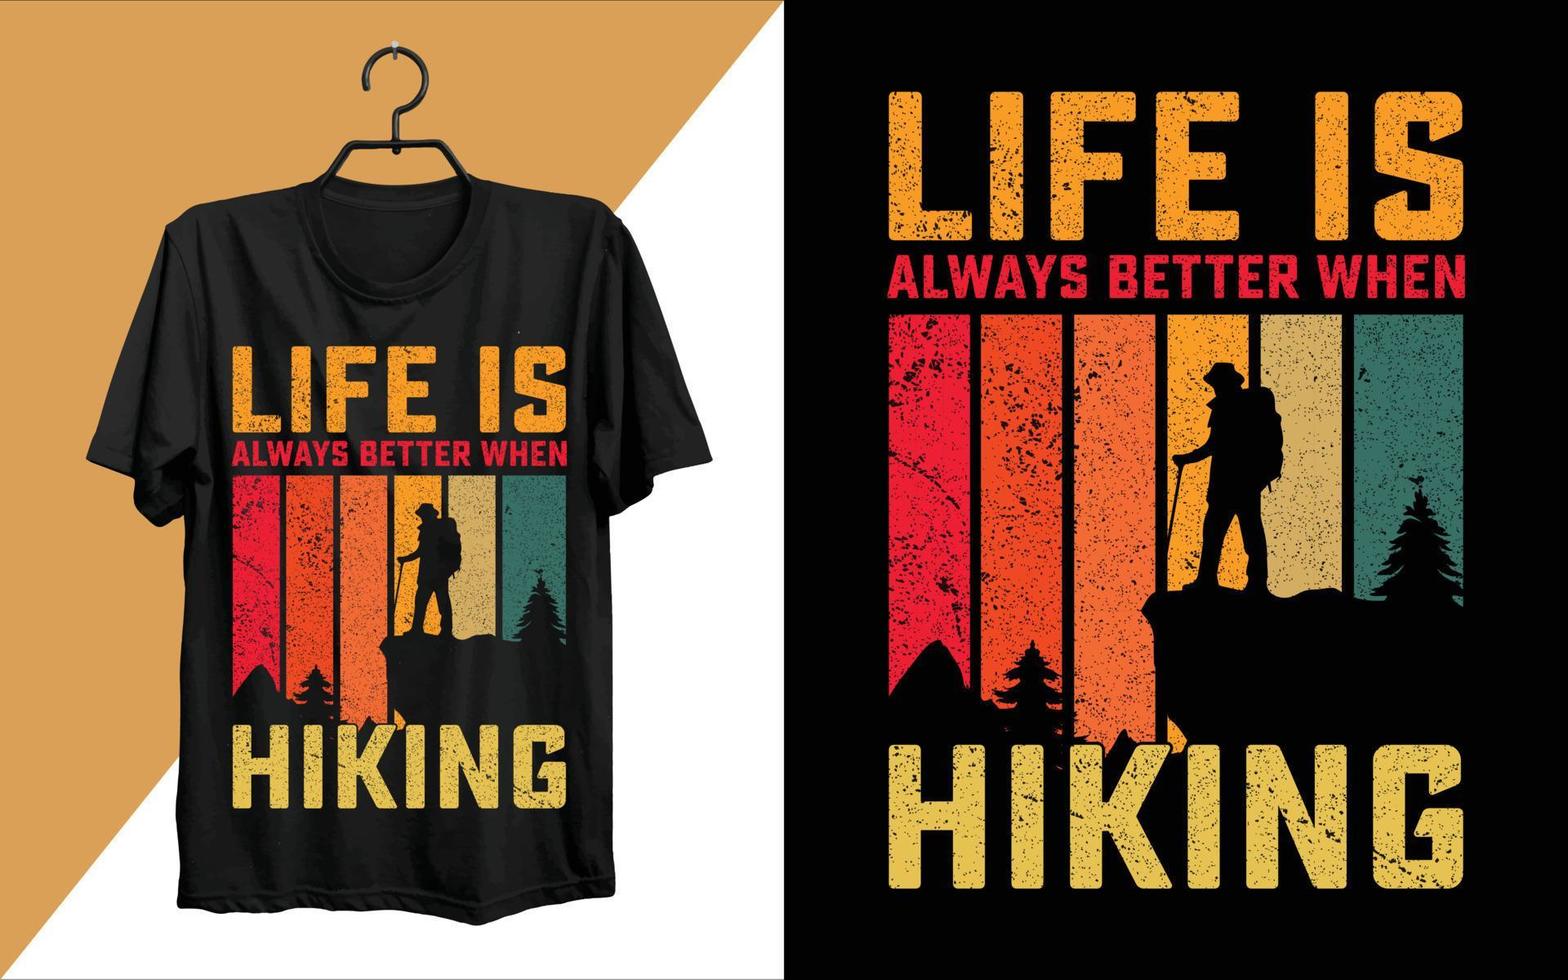 Life Is Always Better When Hiking T-shirt. Hiking typography vector t-shirt design, climbing t-shirt or poster design for adventure lovers, graphic element, vintage artwork, illustration Free Vector